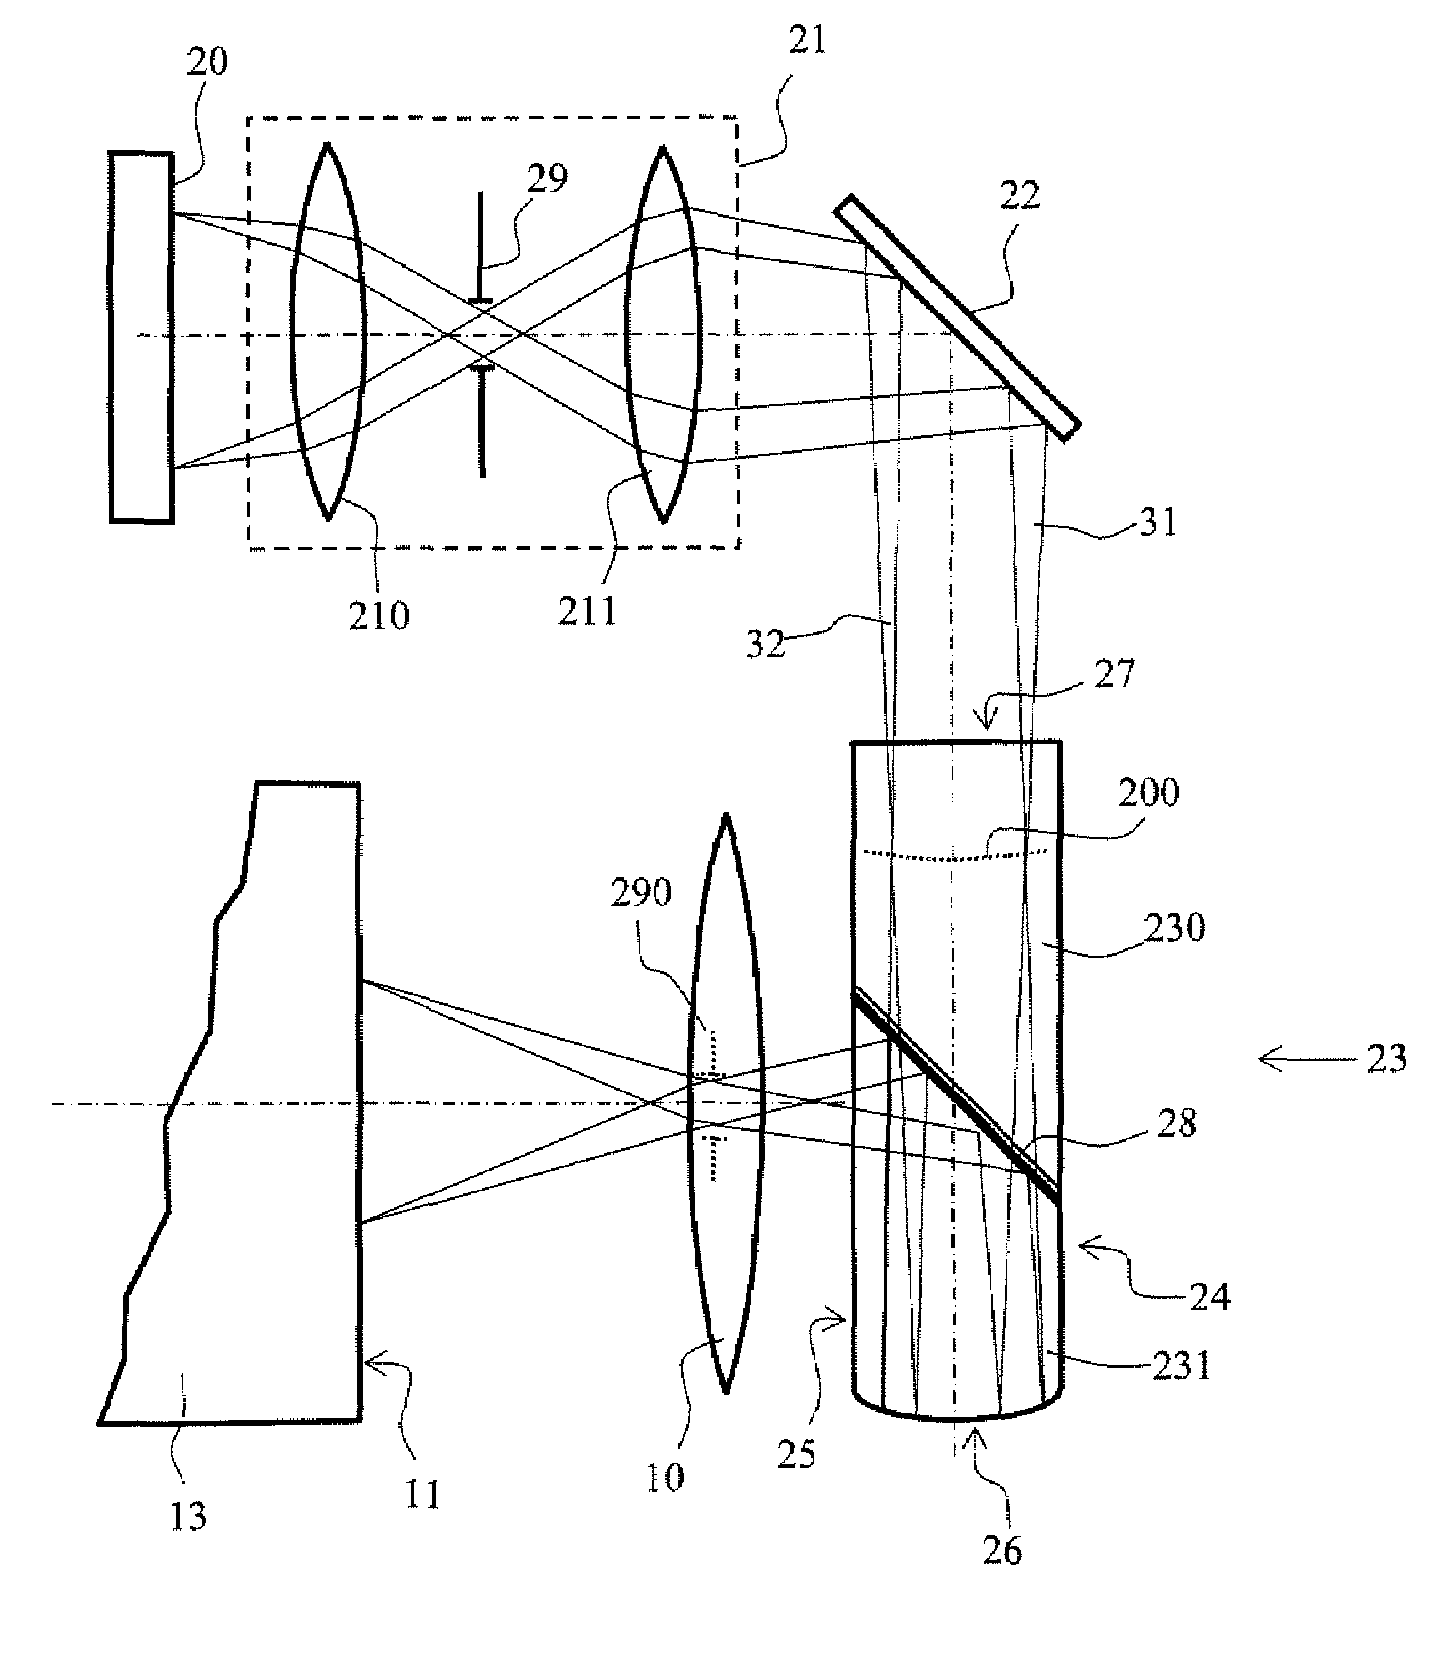 Optical device for superposing electronic images in front of an objective